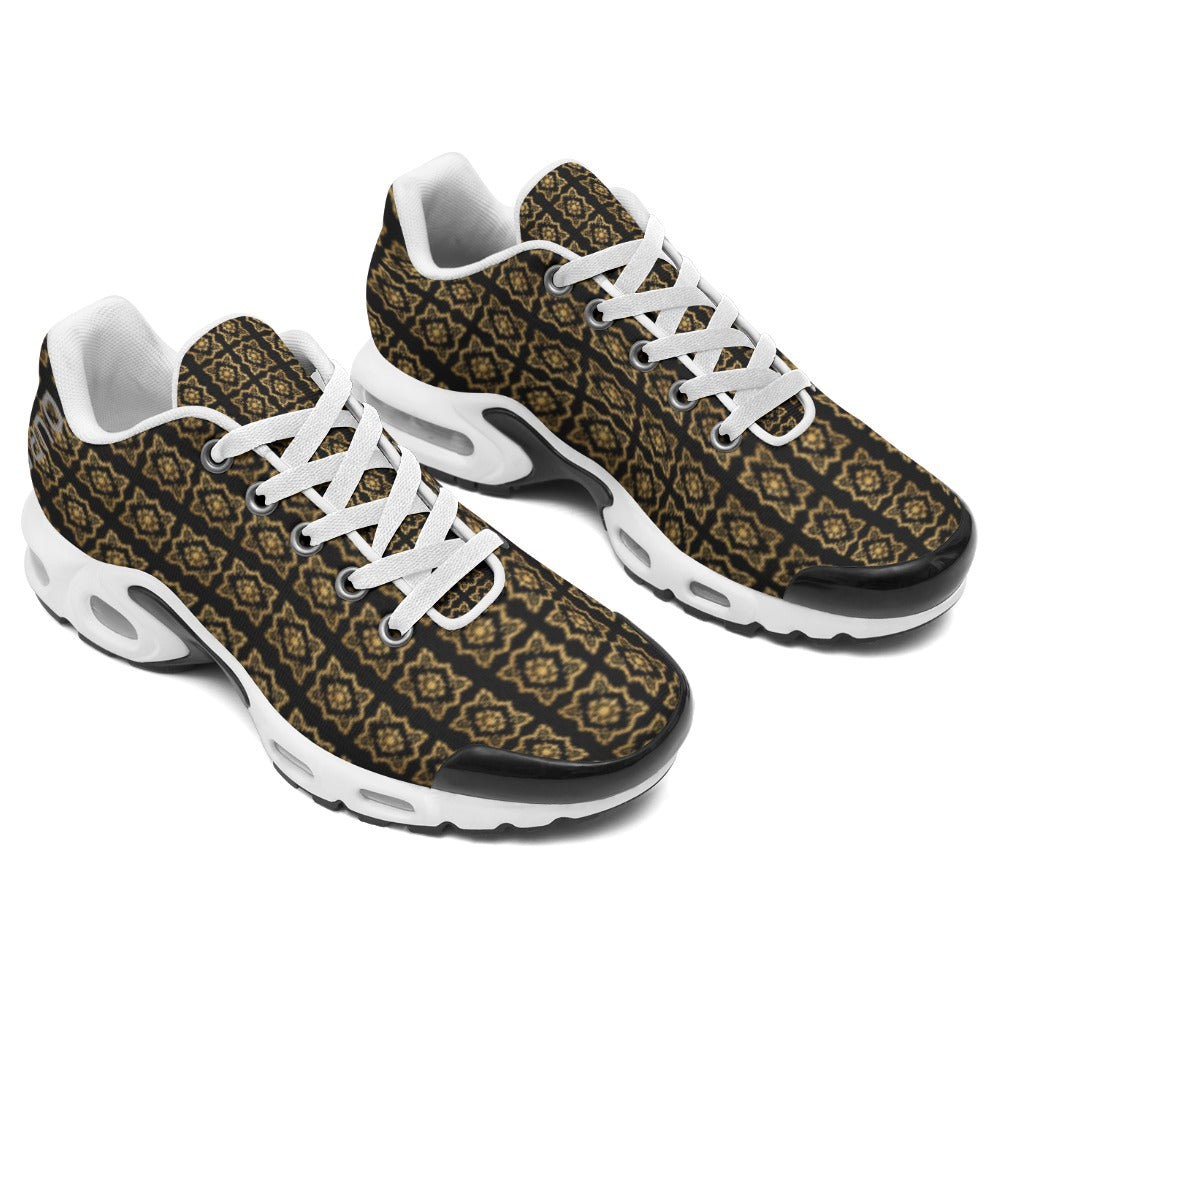 OUPE BAROQUE Men's SPORT AIRS